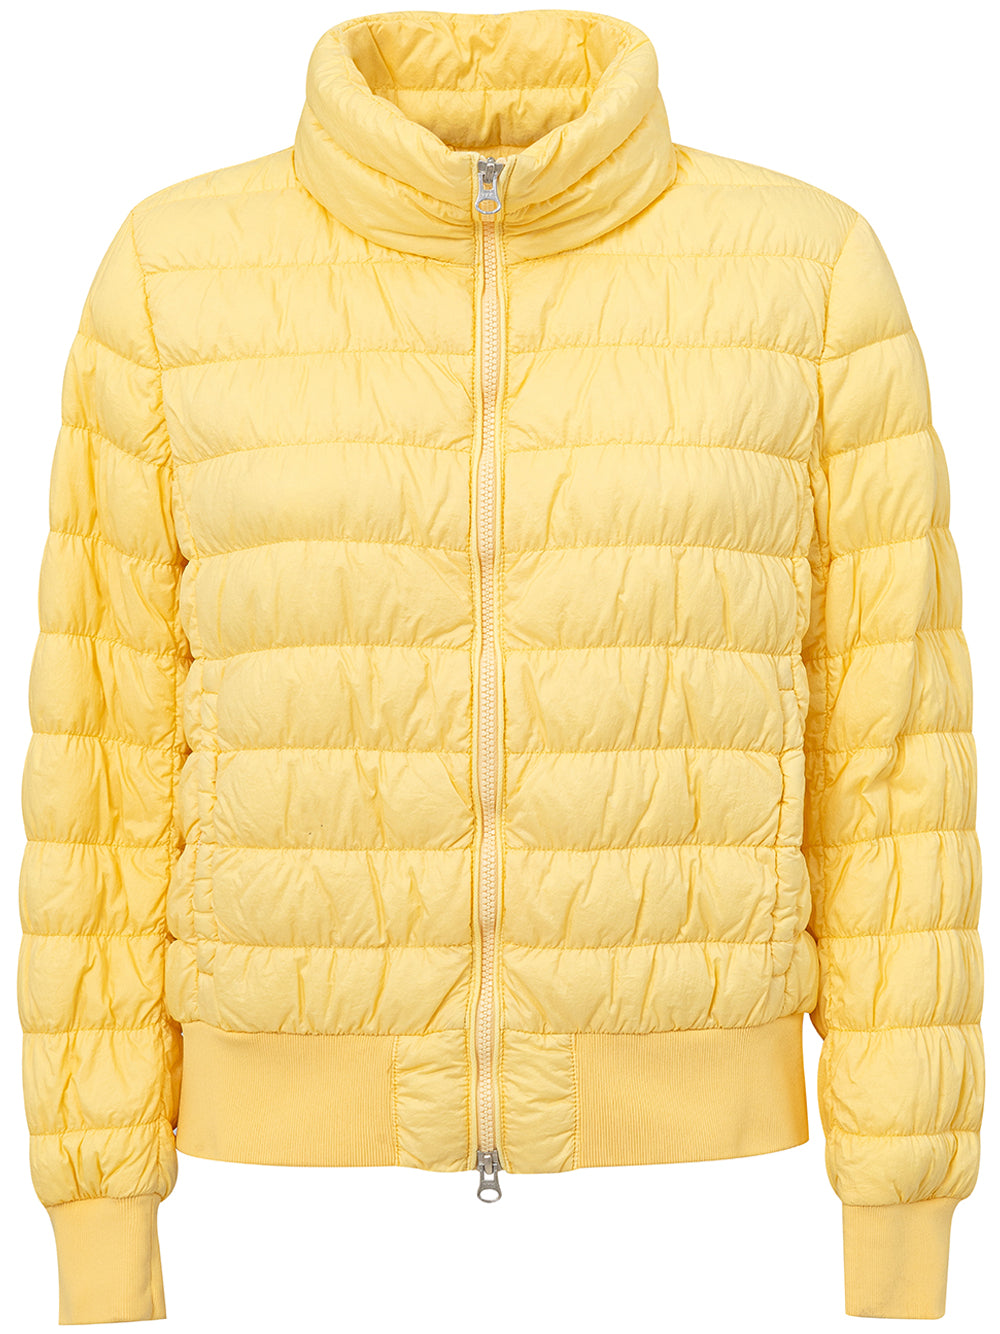 Woolrich padded jacket in yellow